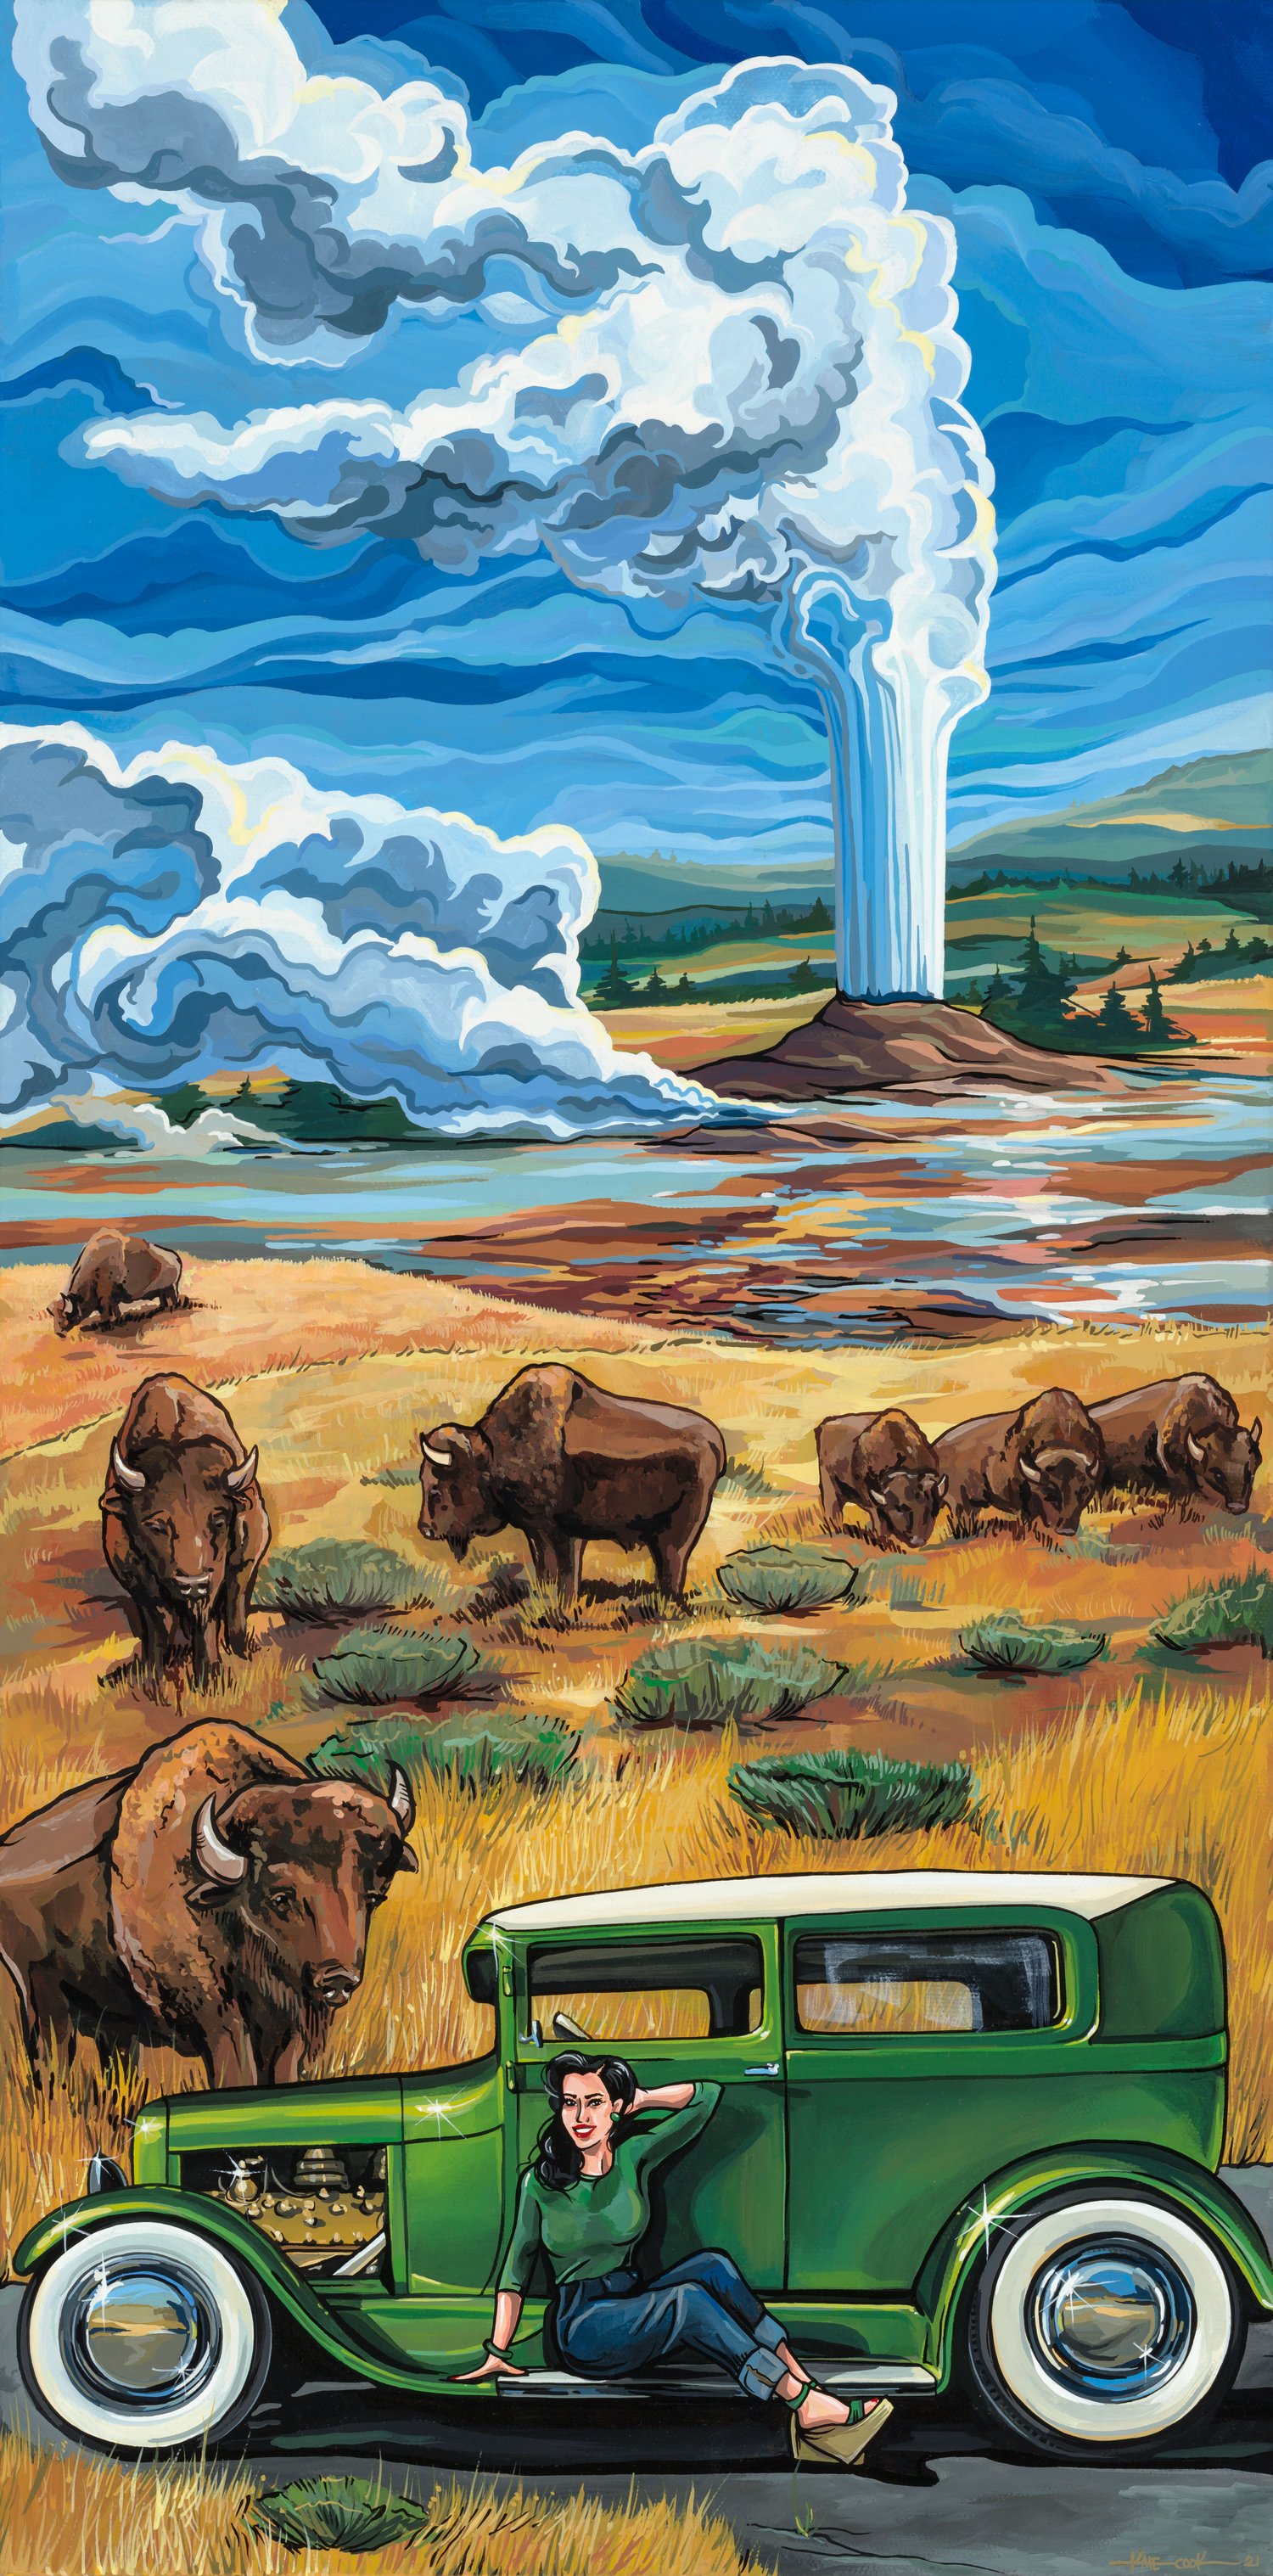 Yellowstone by Kate Cook - Original Painting